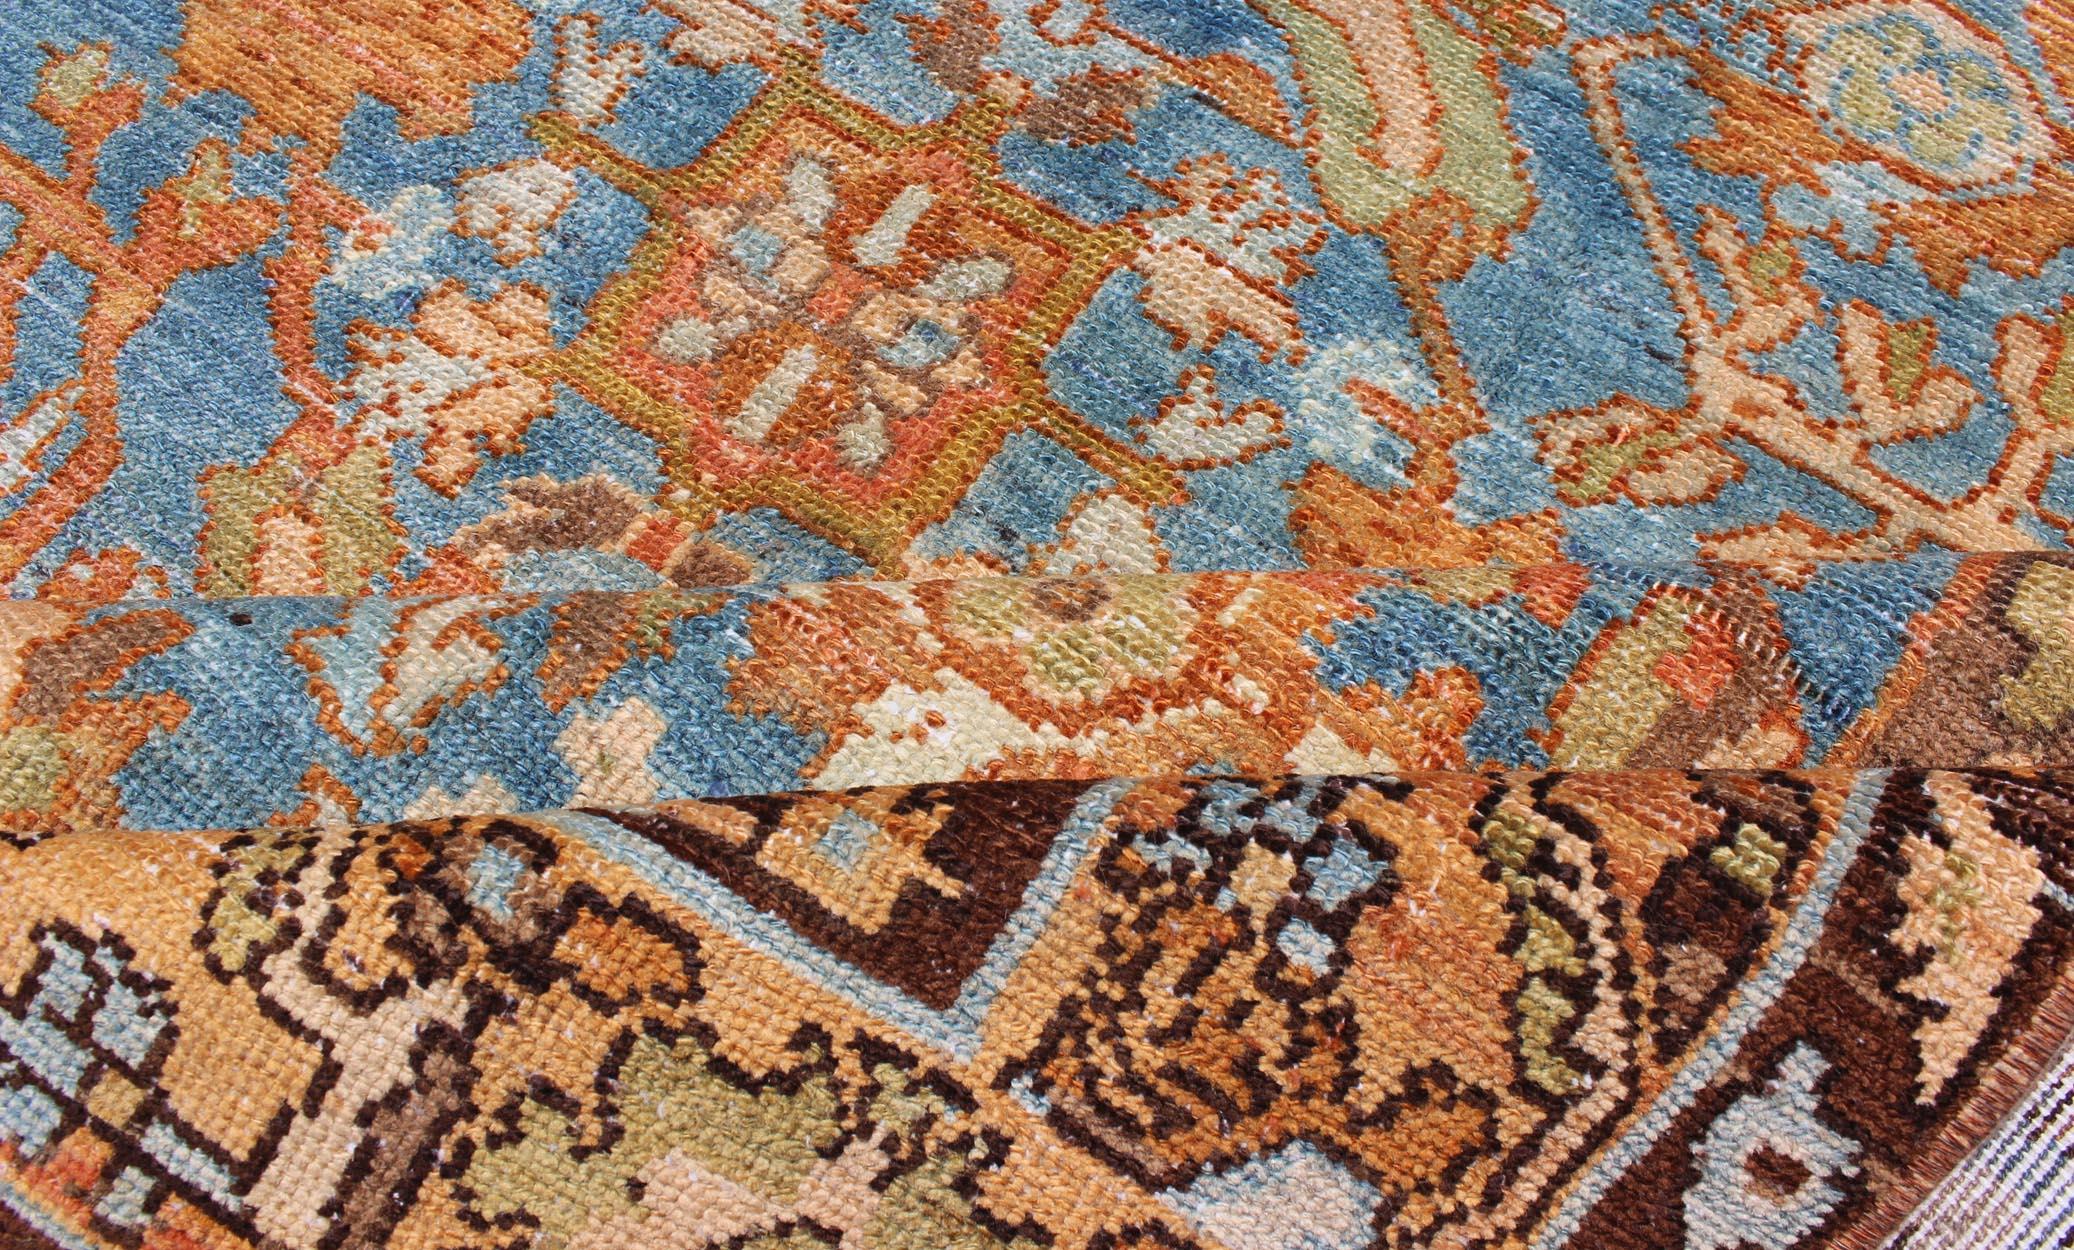 Early 20th Century Vibrant Antique Persian Malayer Rug in Shades of Rust, Orange, and Blue For Sale